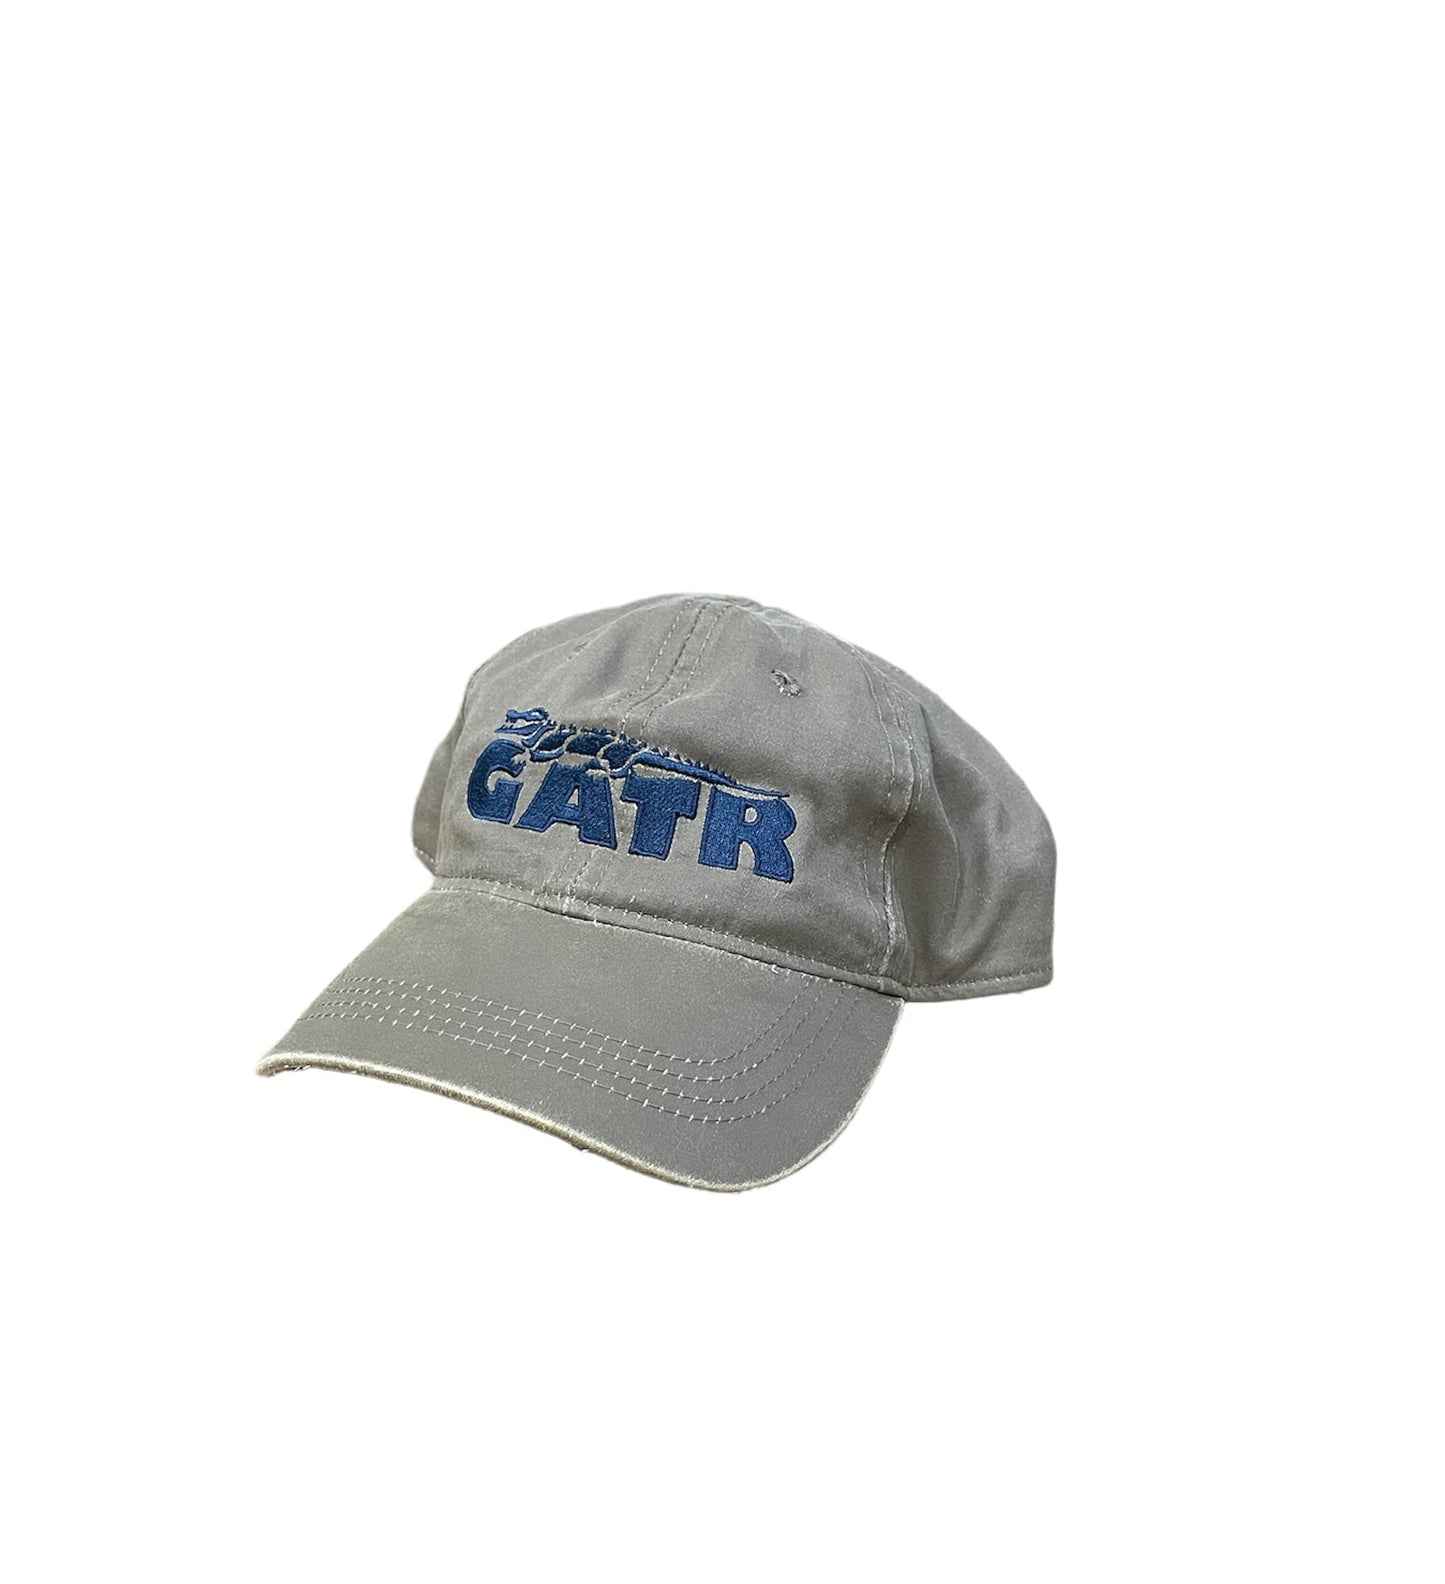 Classic Embroidered GATR Options by GATR